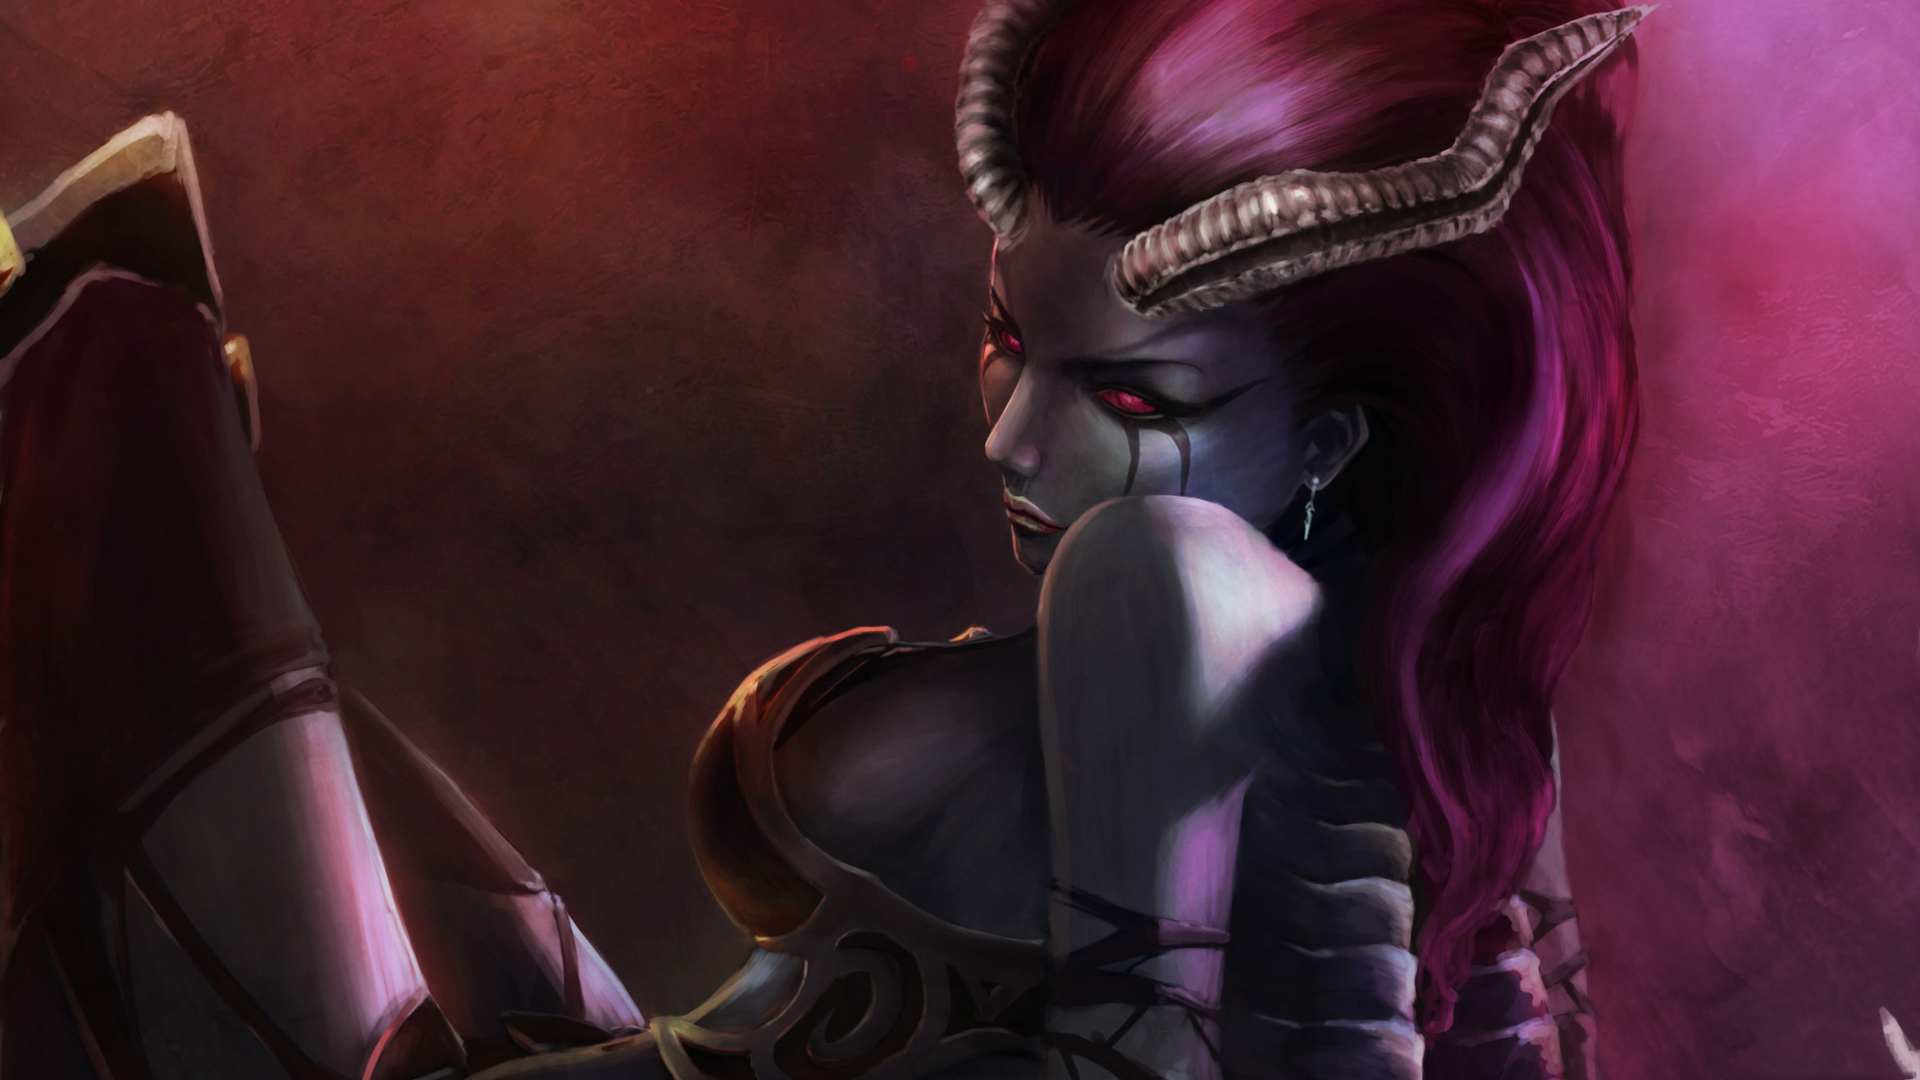 Photo DOTA 2 Queen of Pain Demons Horns Fantasy young 1920x1080